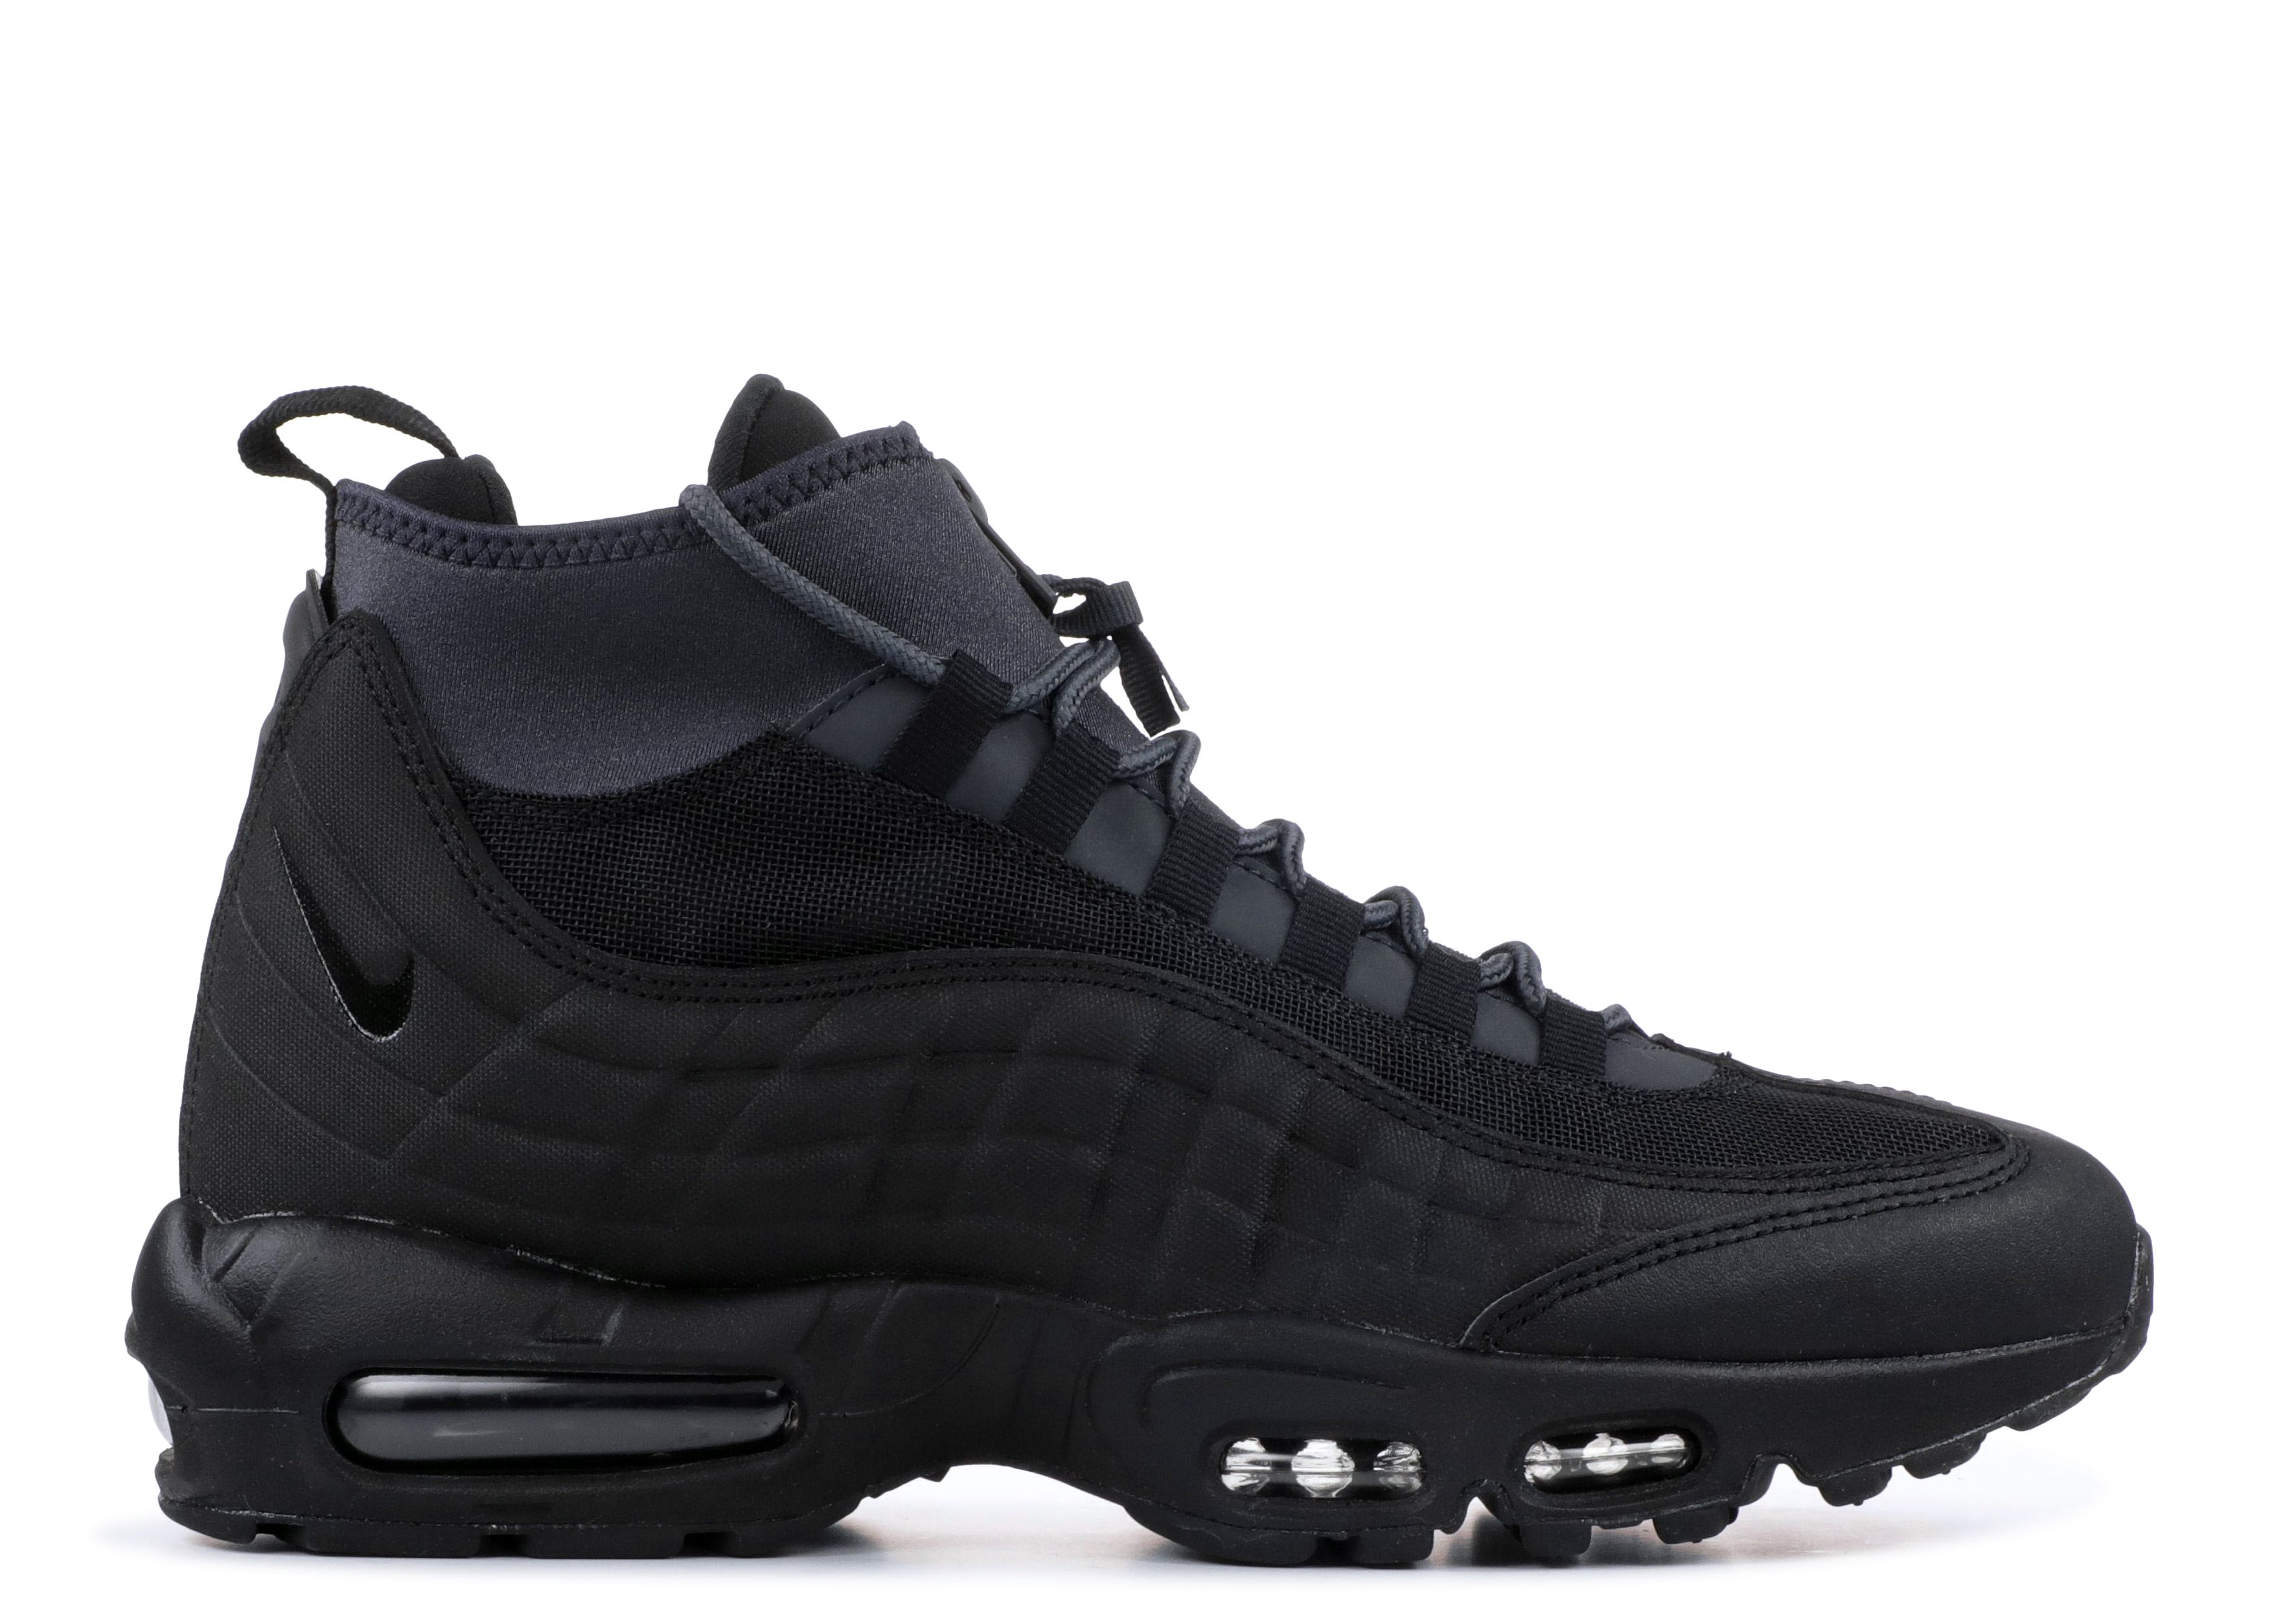 Air Max 95 Sneakerboot 'Anthracite'